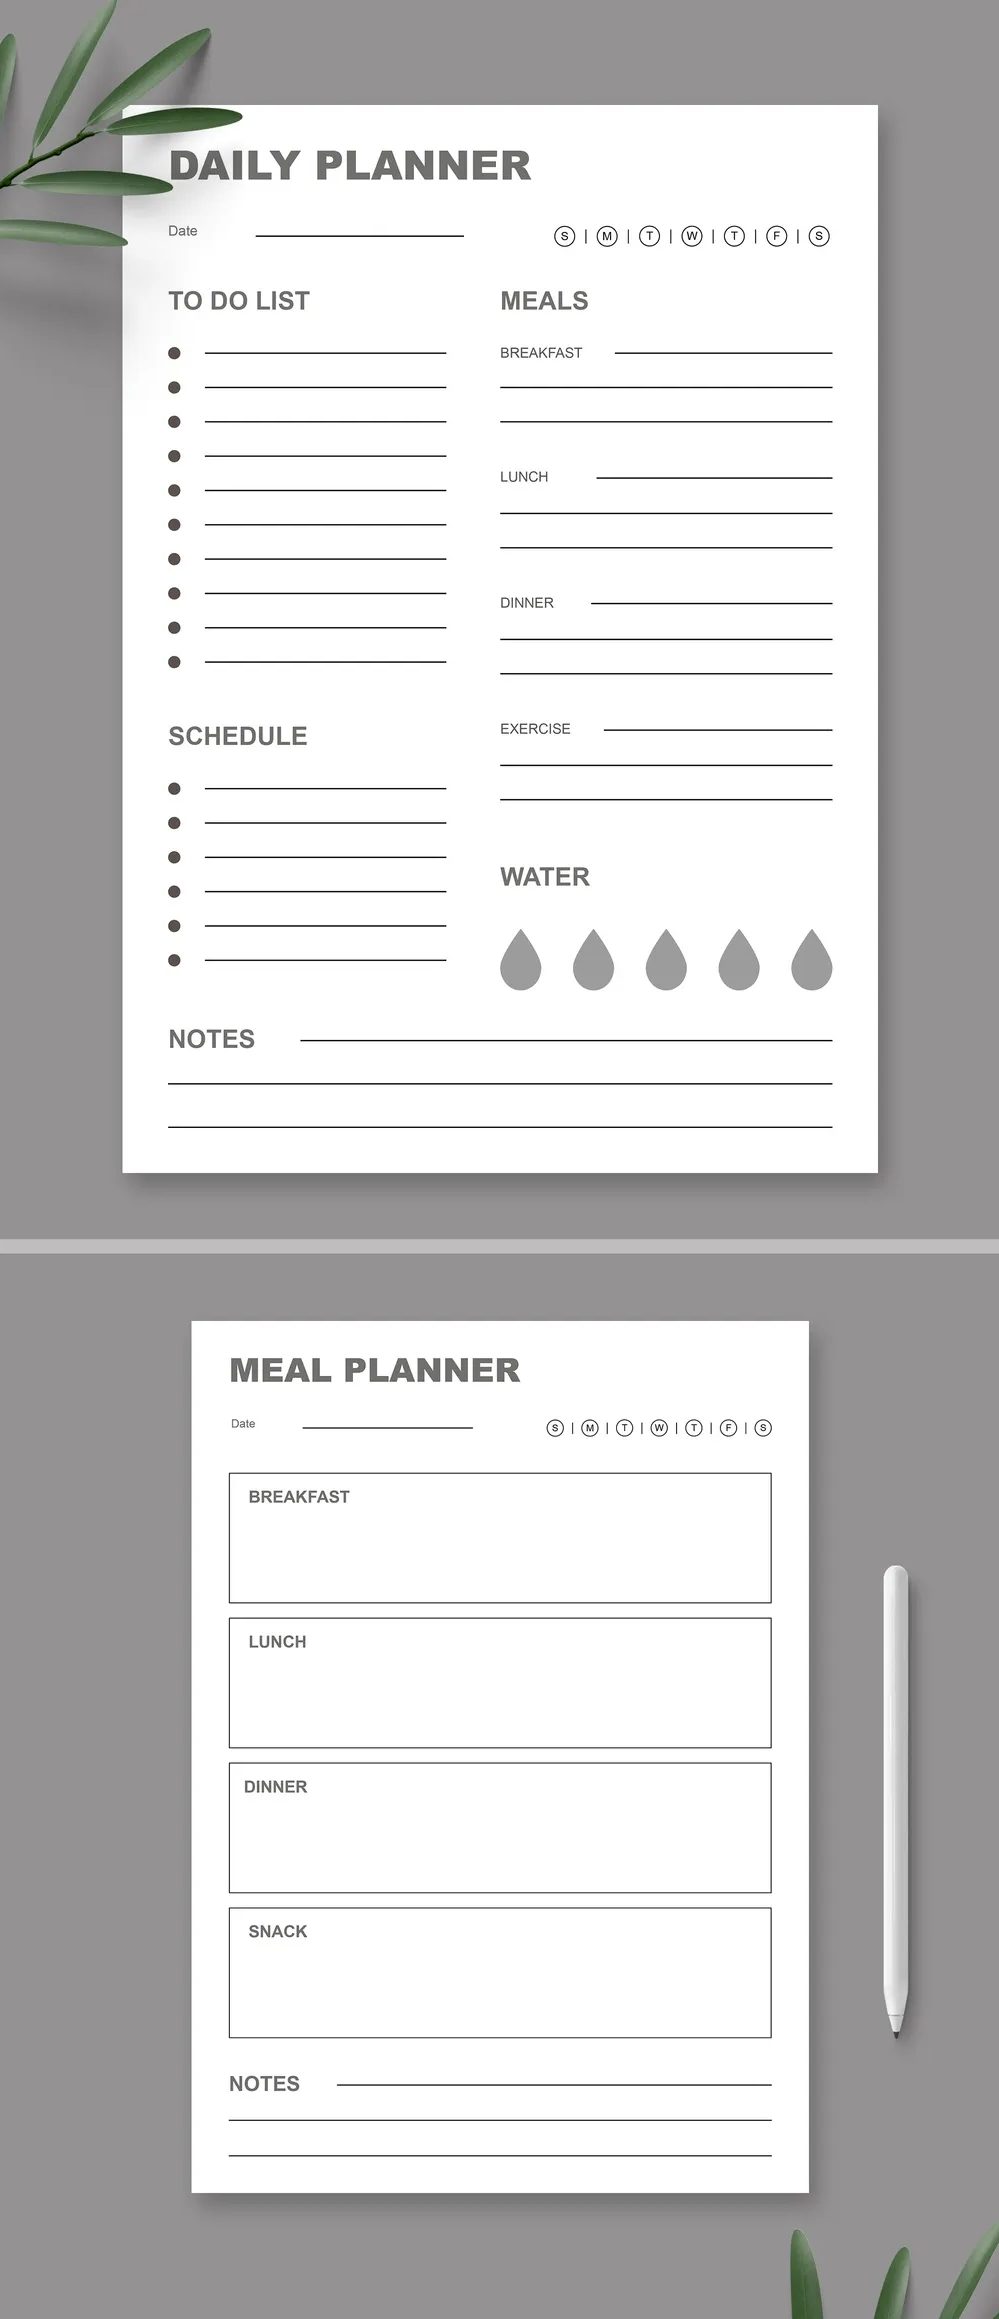 Adobestock - Daily Planner Template Layout 721267867